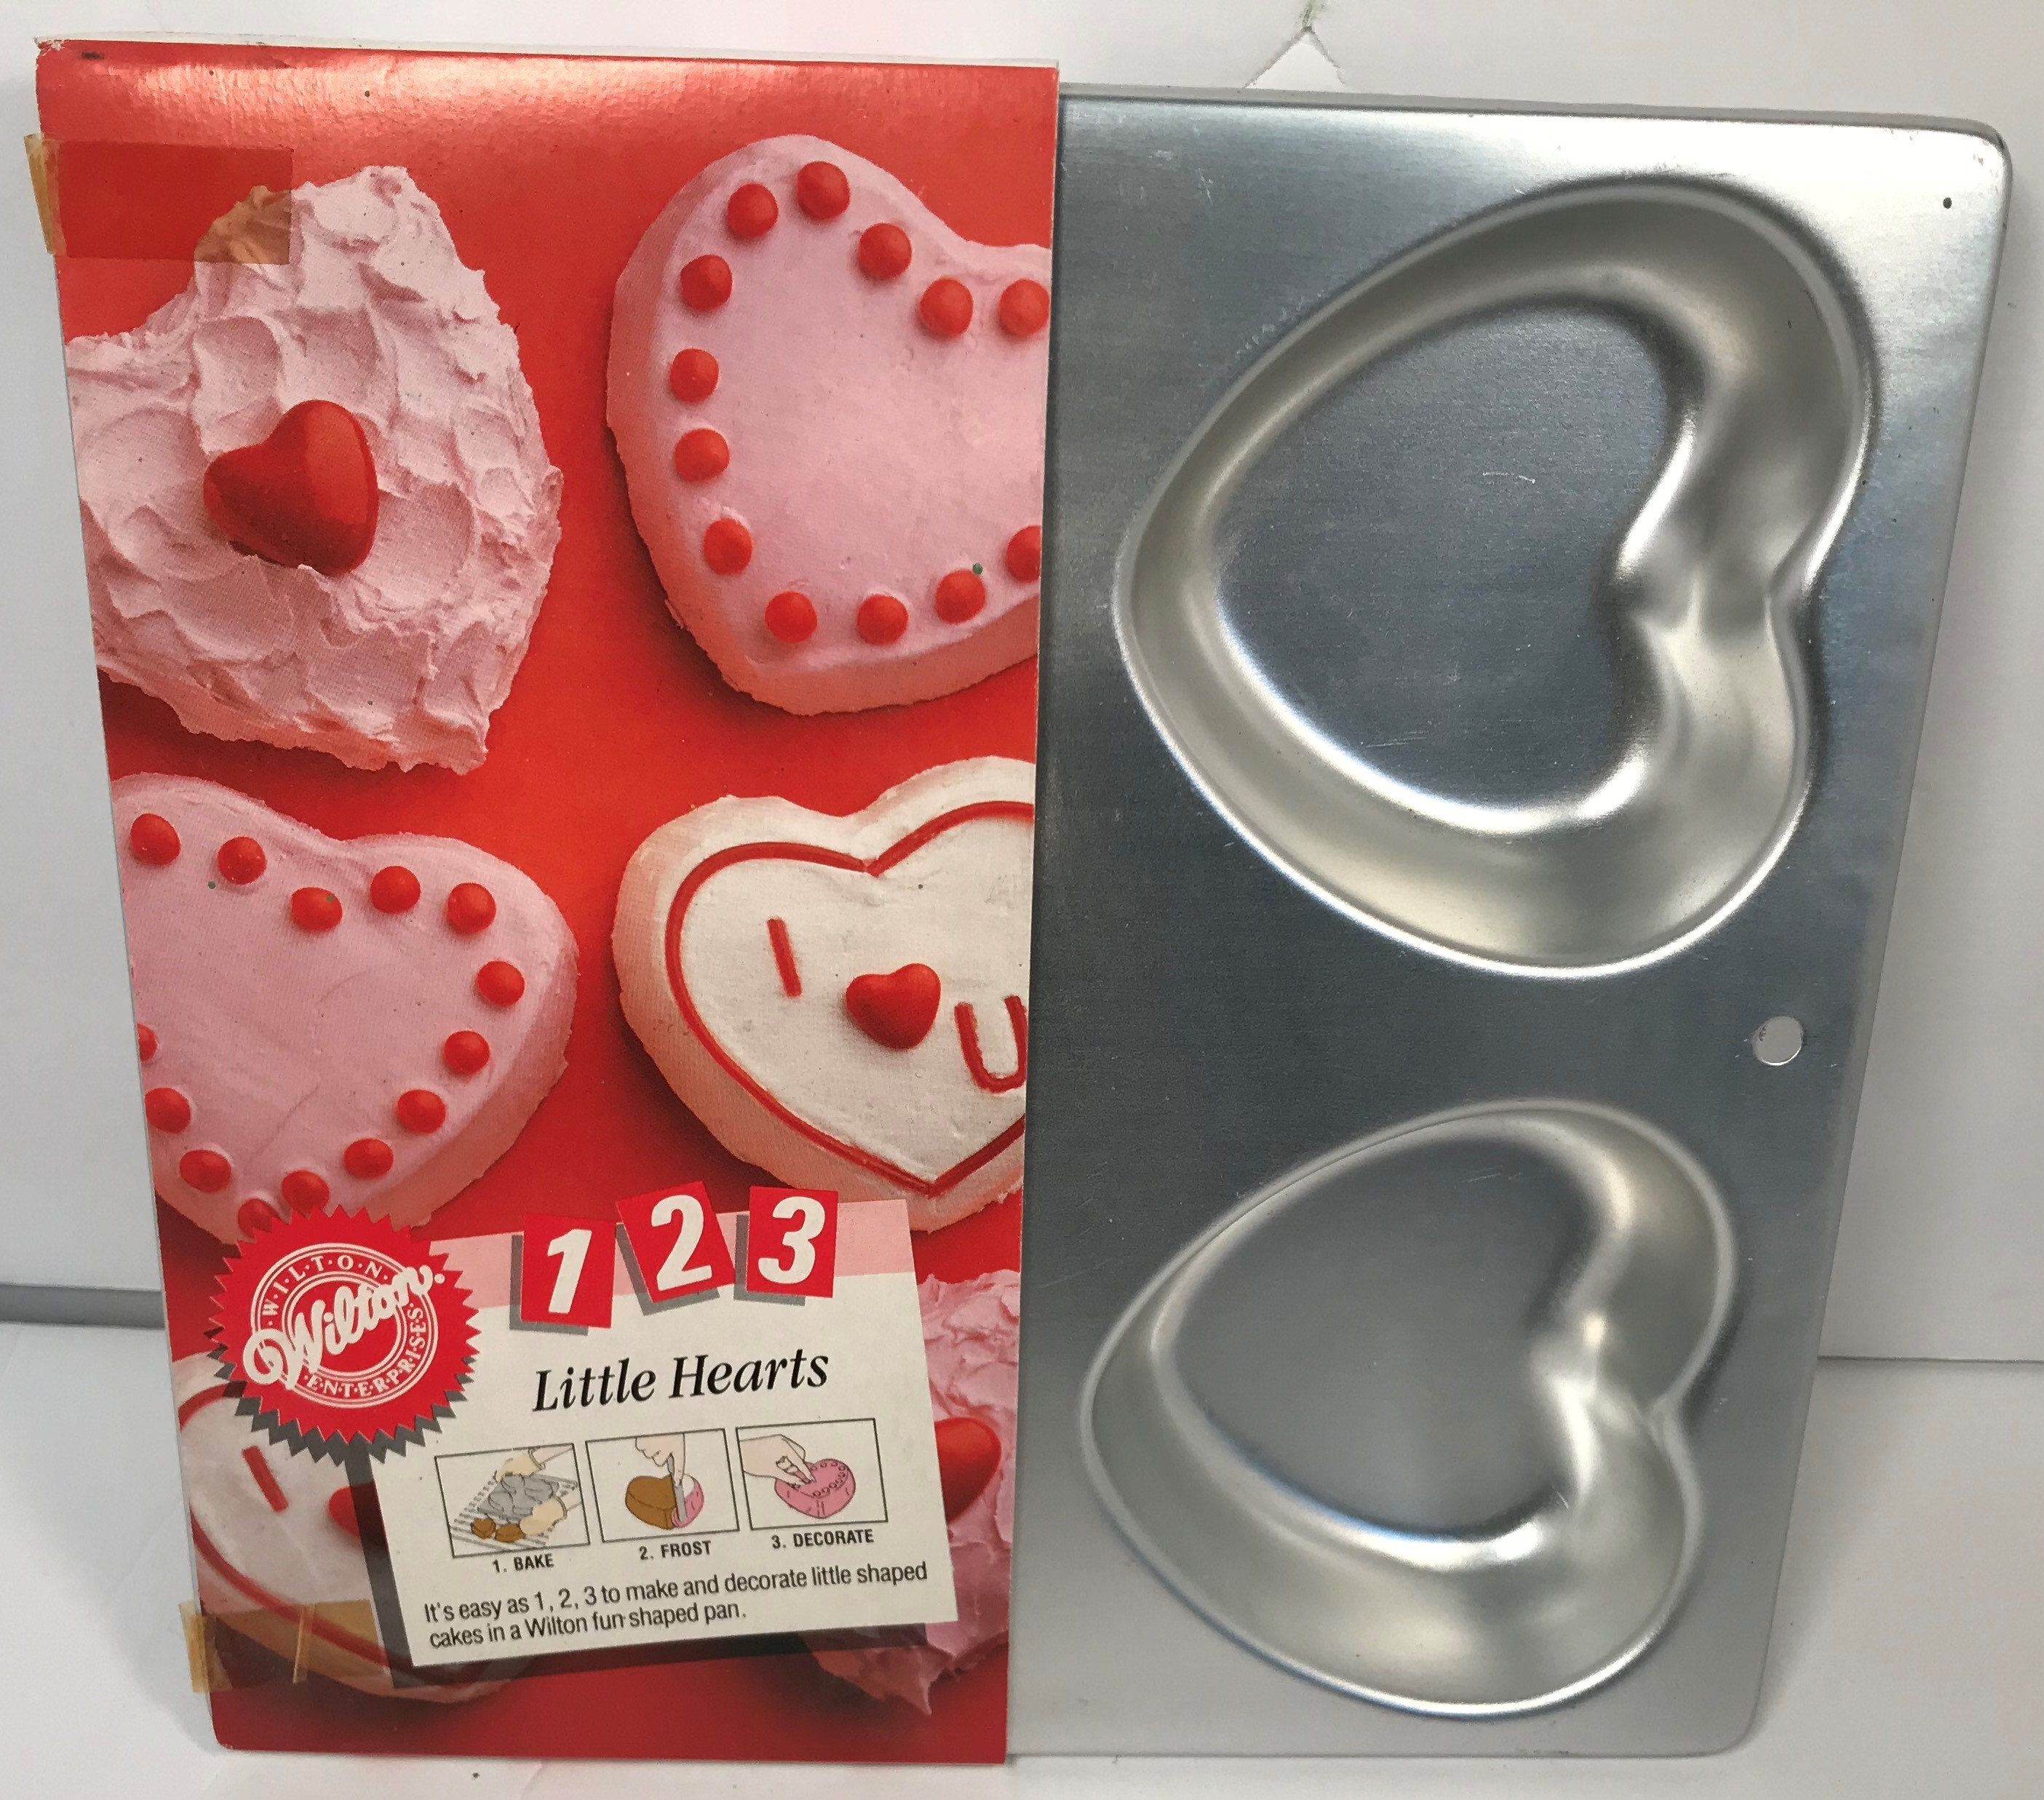 Round or Heart Shaped Silicone Cake Pan Nonstick Cake Baking Molds for Wedding Birthday Party Valentine Lake Blue Heart-Shaped 8 Inches